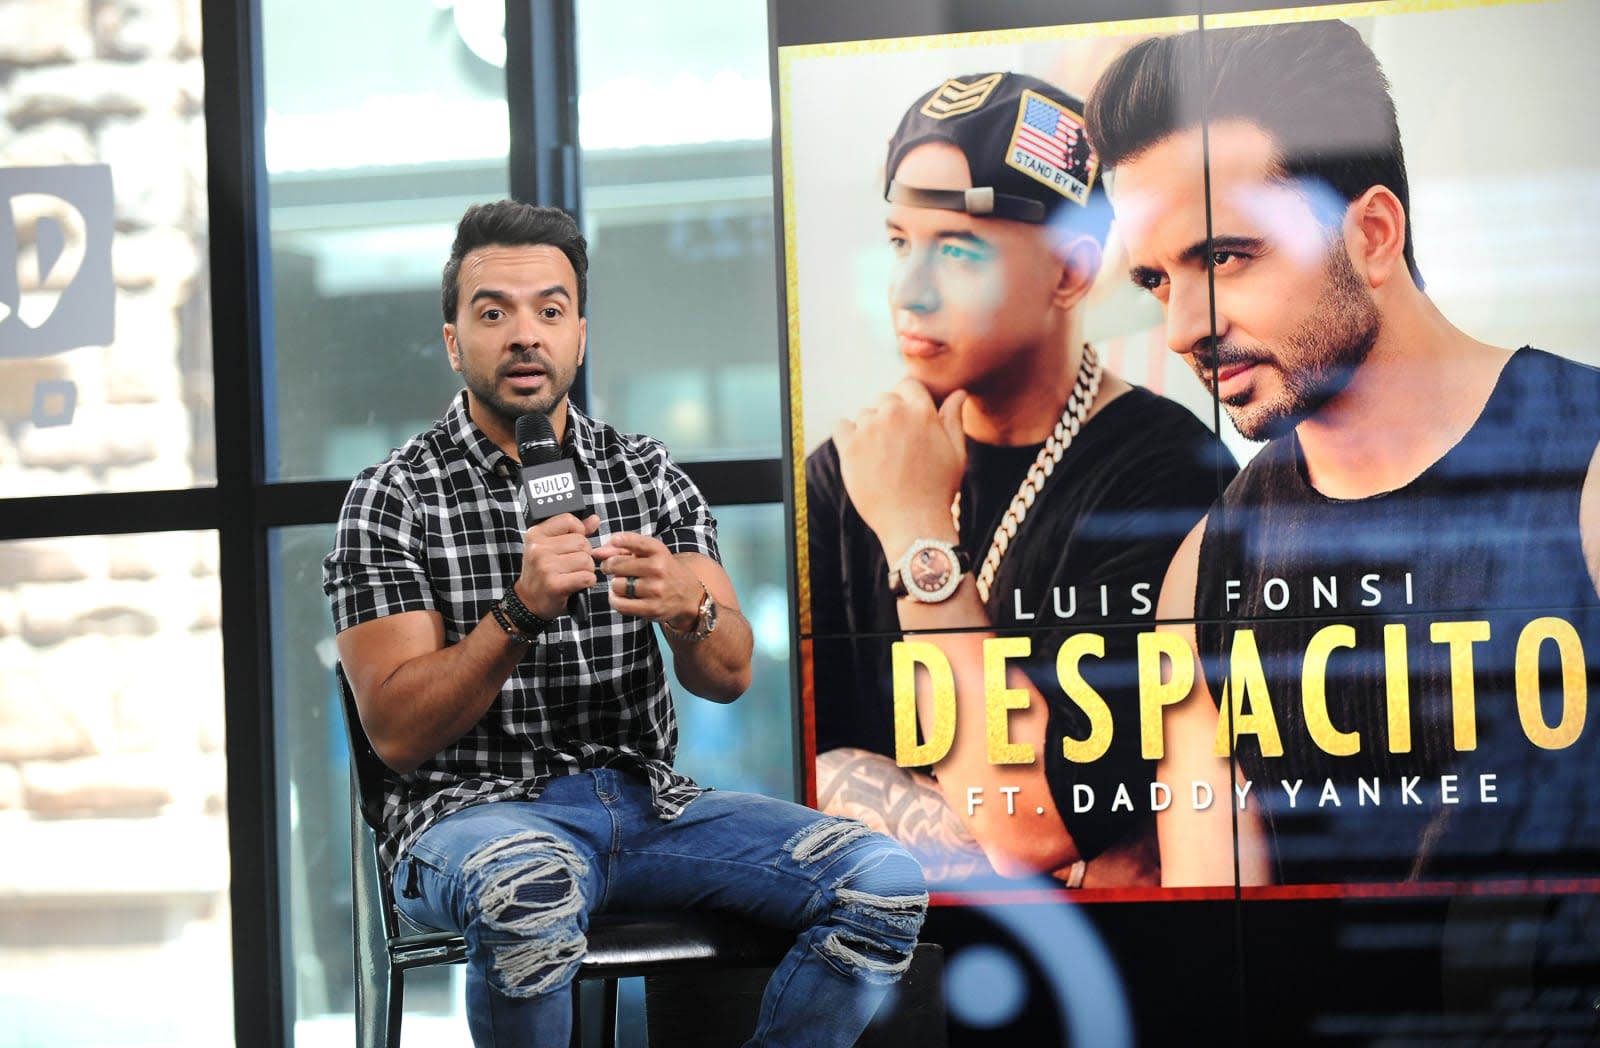 Luis Fonsi S Despacito Is The Most Streamed Song Of All Time Engadget